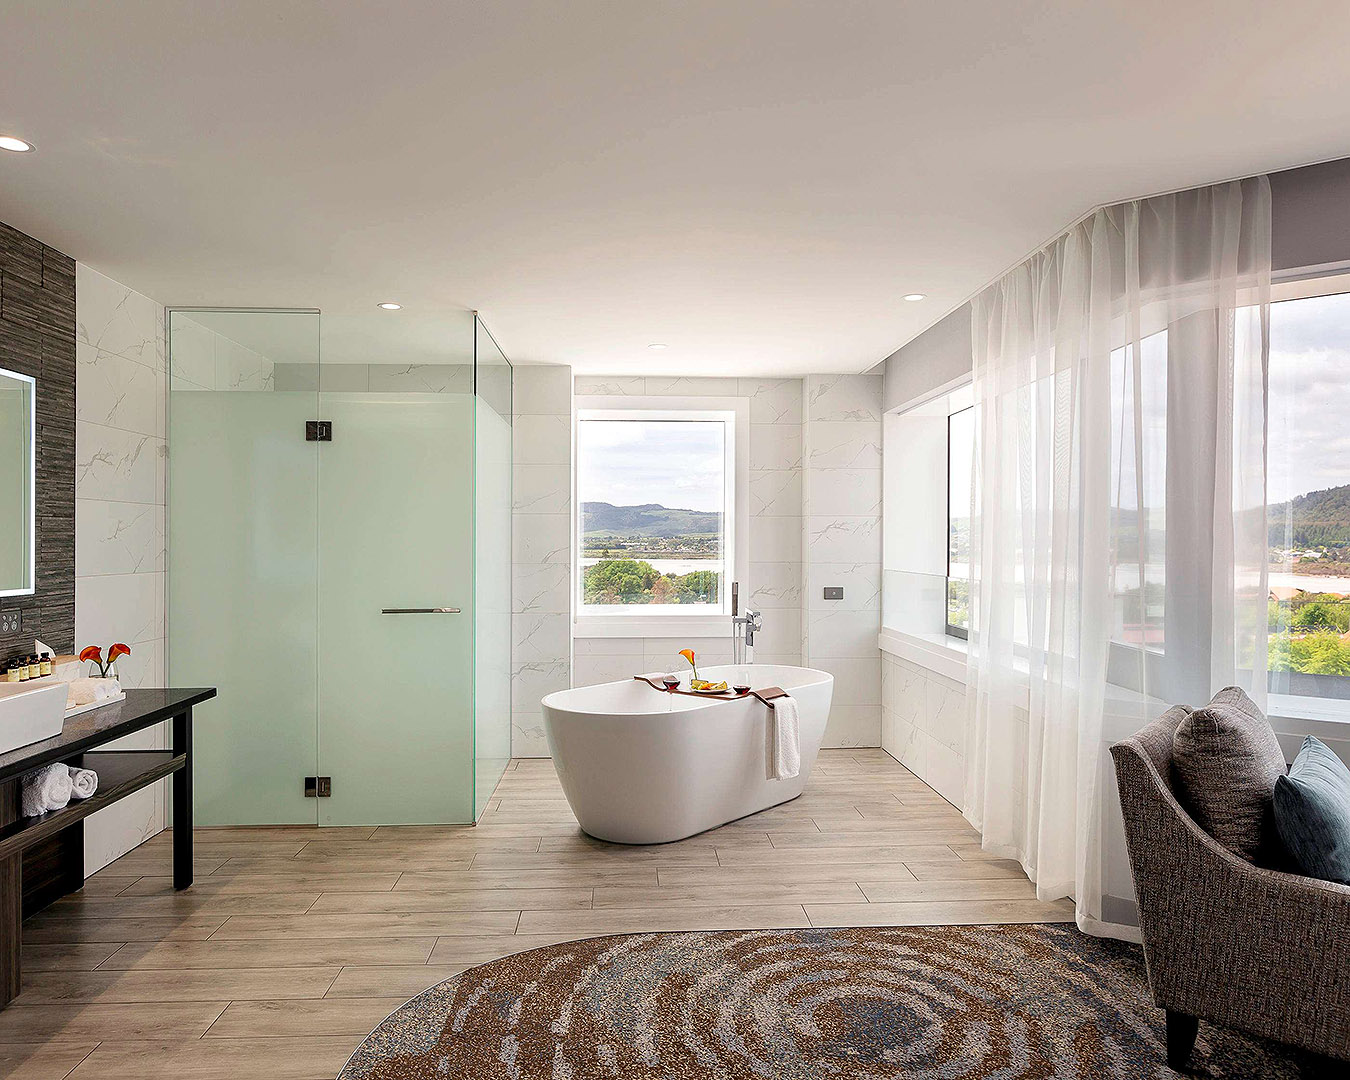 A fancy hotel room with a sleek stone bath, with stylish wooden tray for holding your wine, in the centre. 